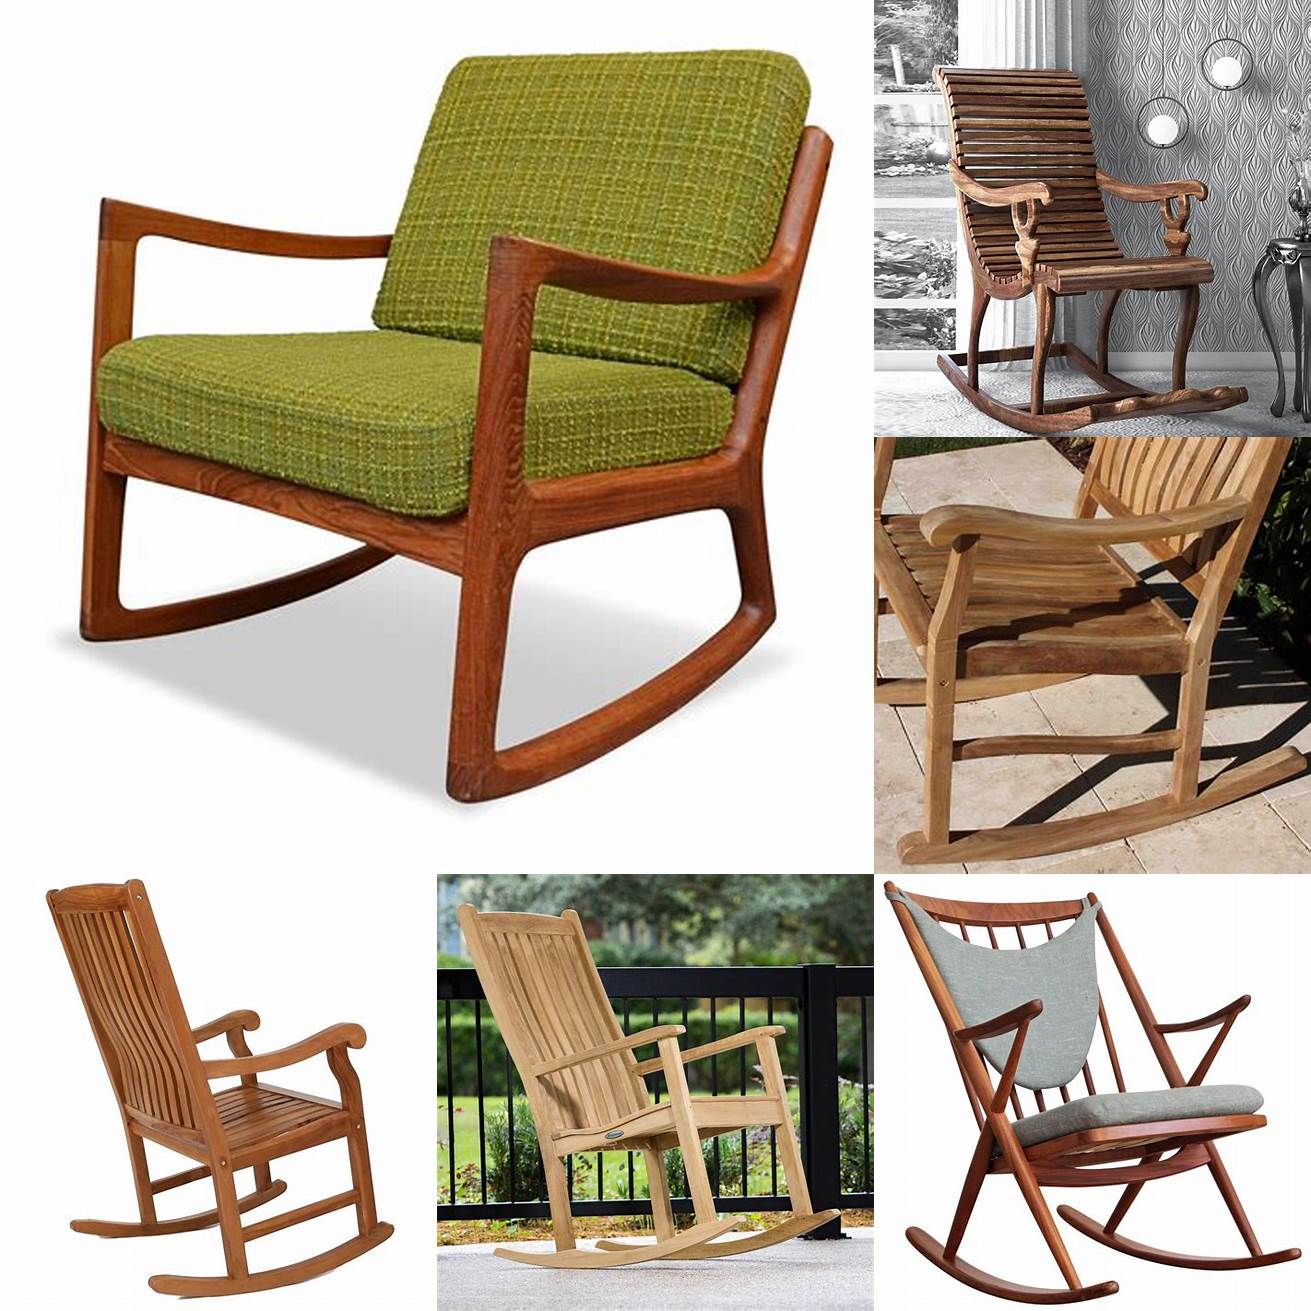 A picture of a teak rocking chair with a design guide